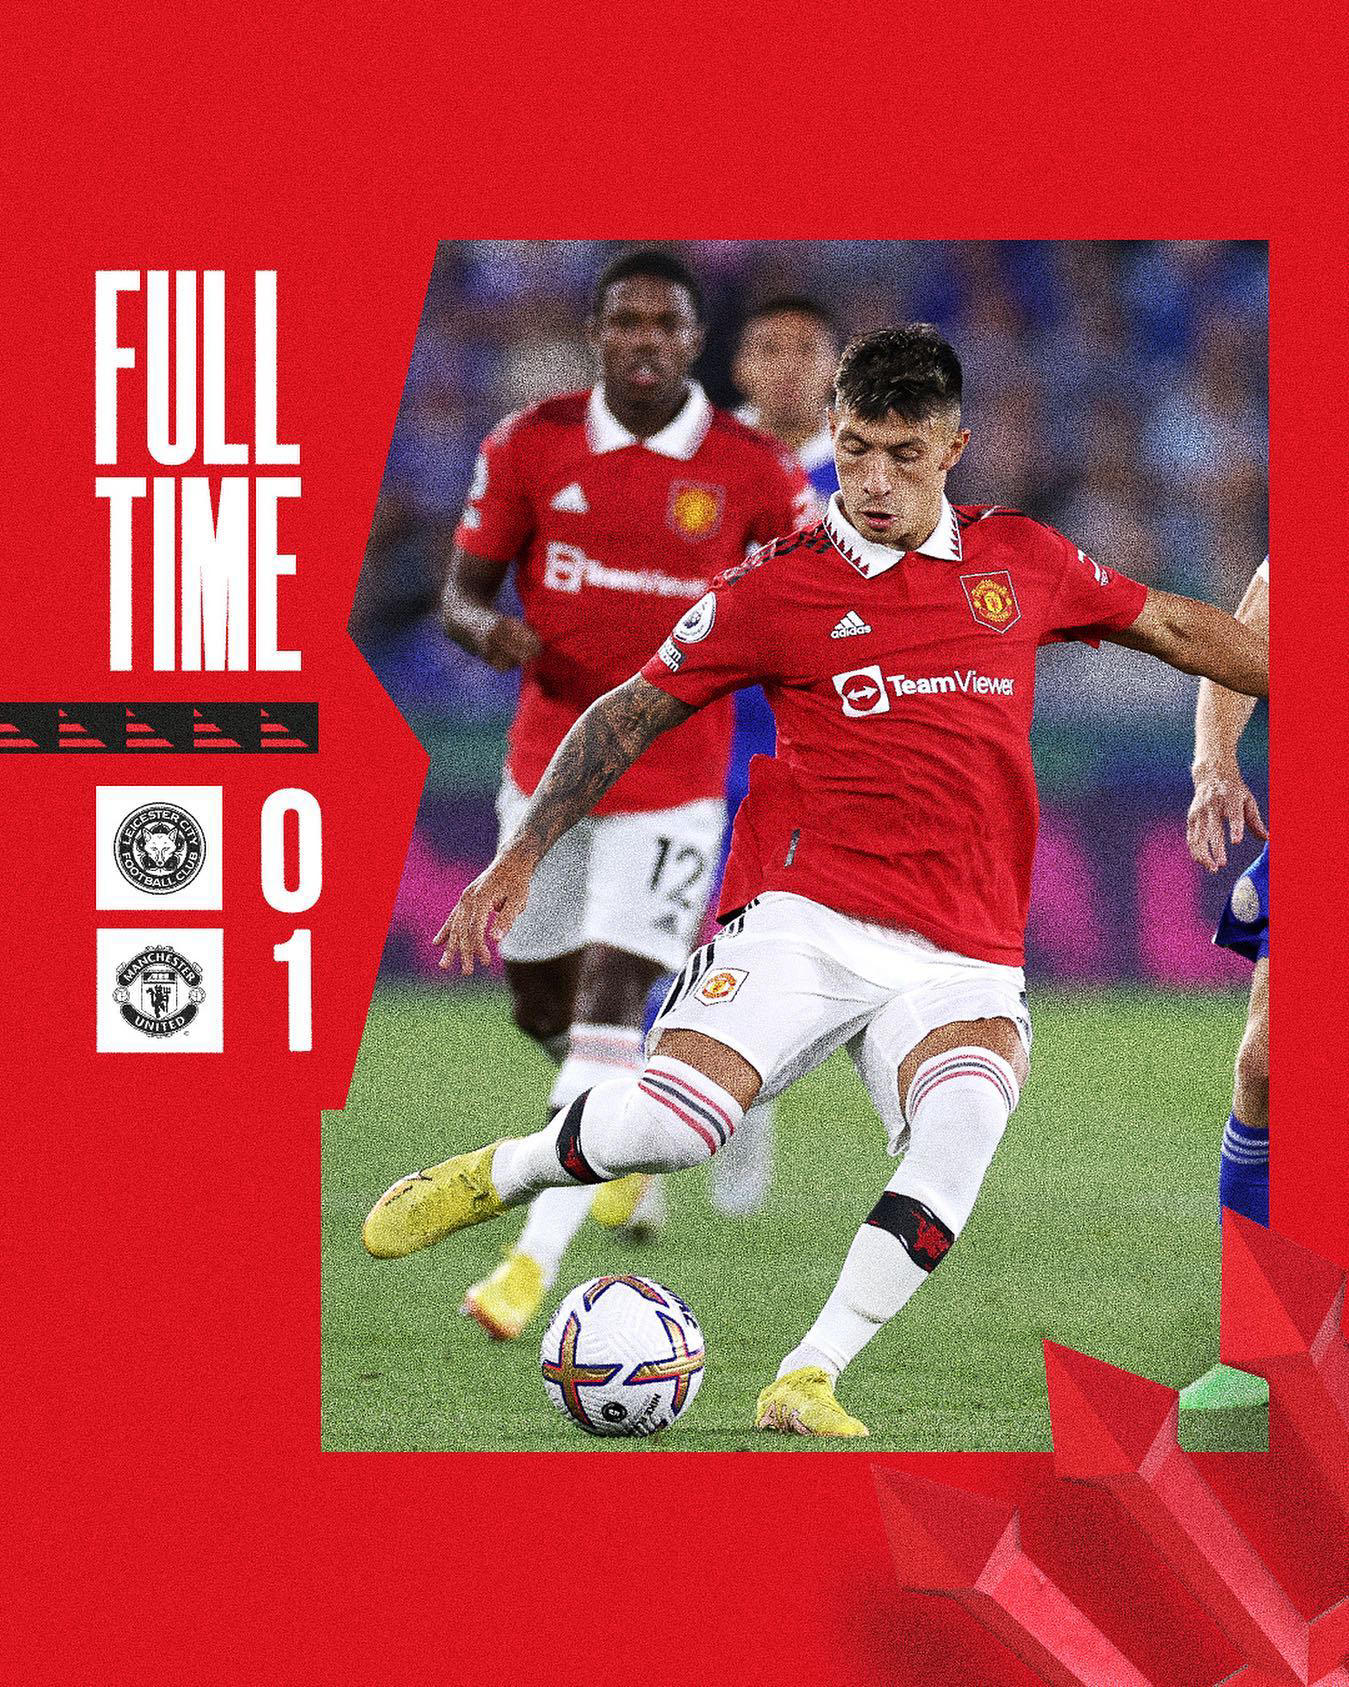 Manchester United - Taking all three points back to Manchester